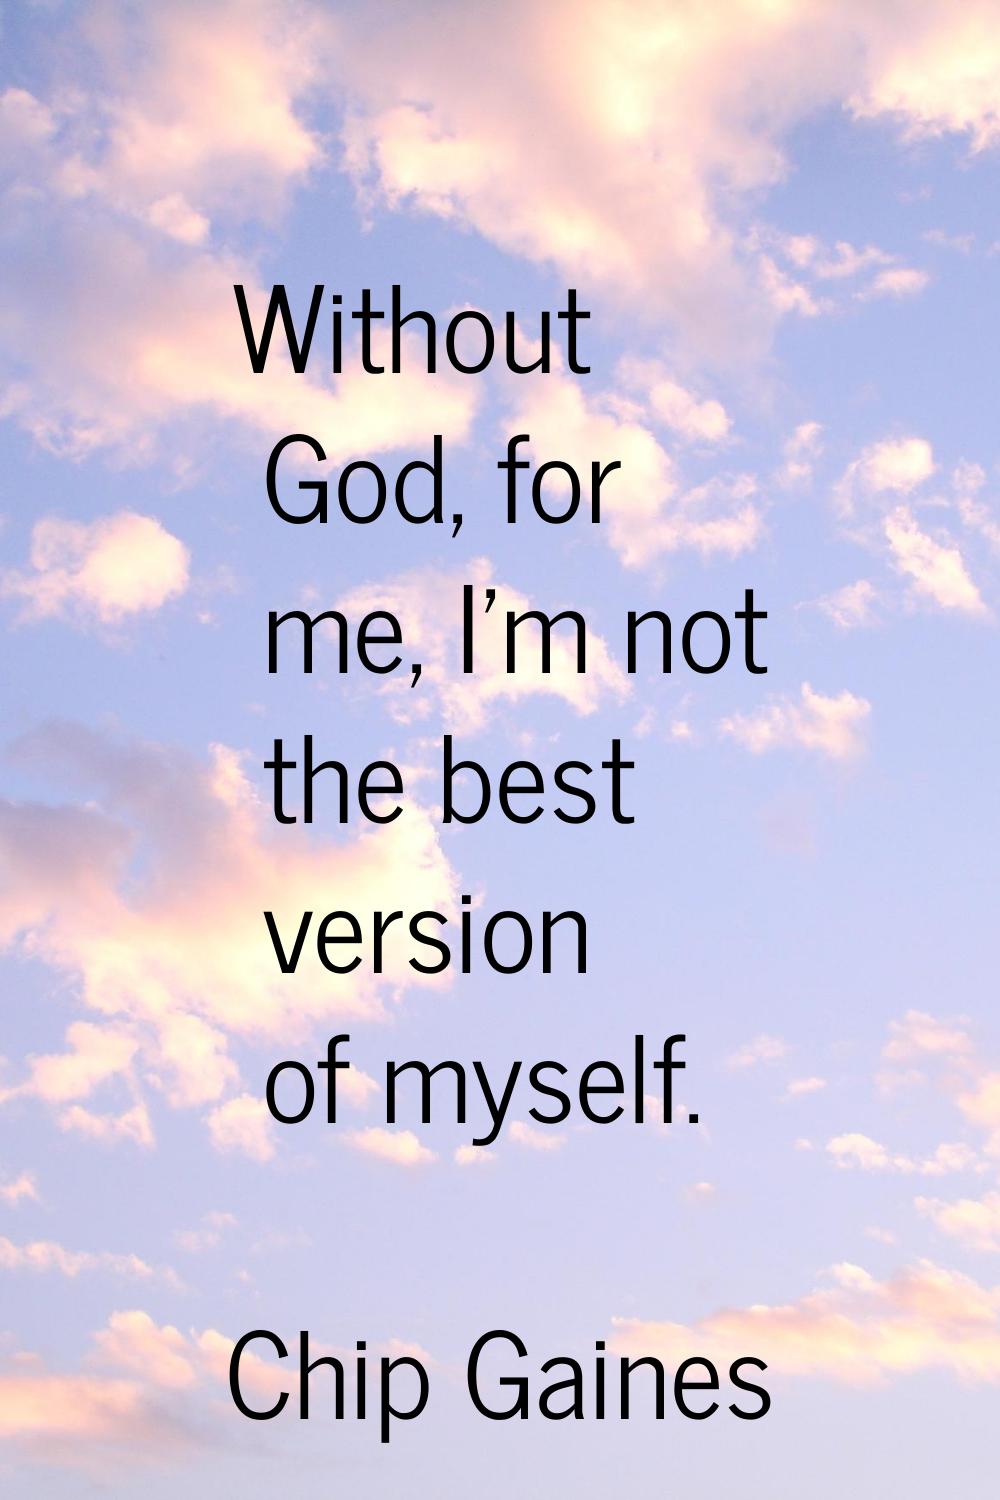 Without God, for me, I'm not the best version of myself.